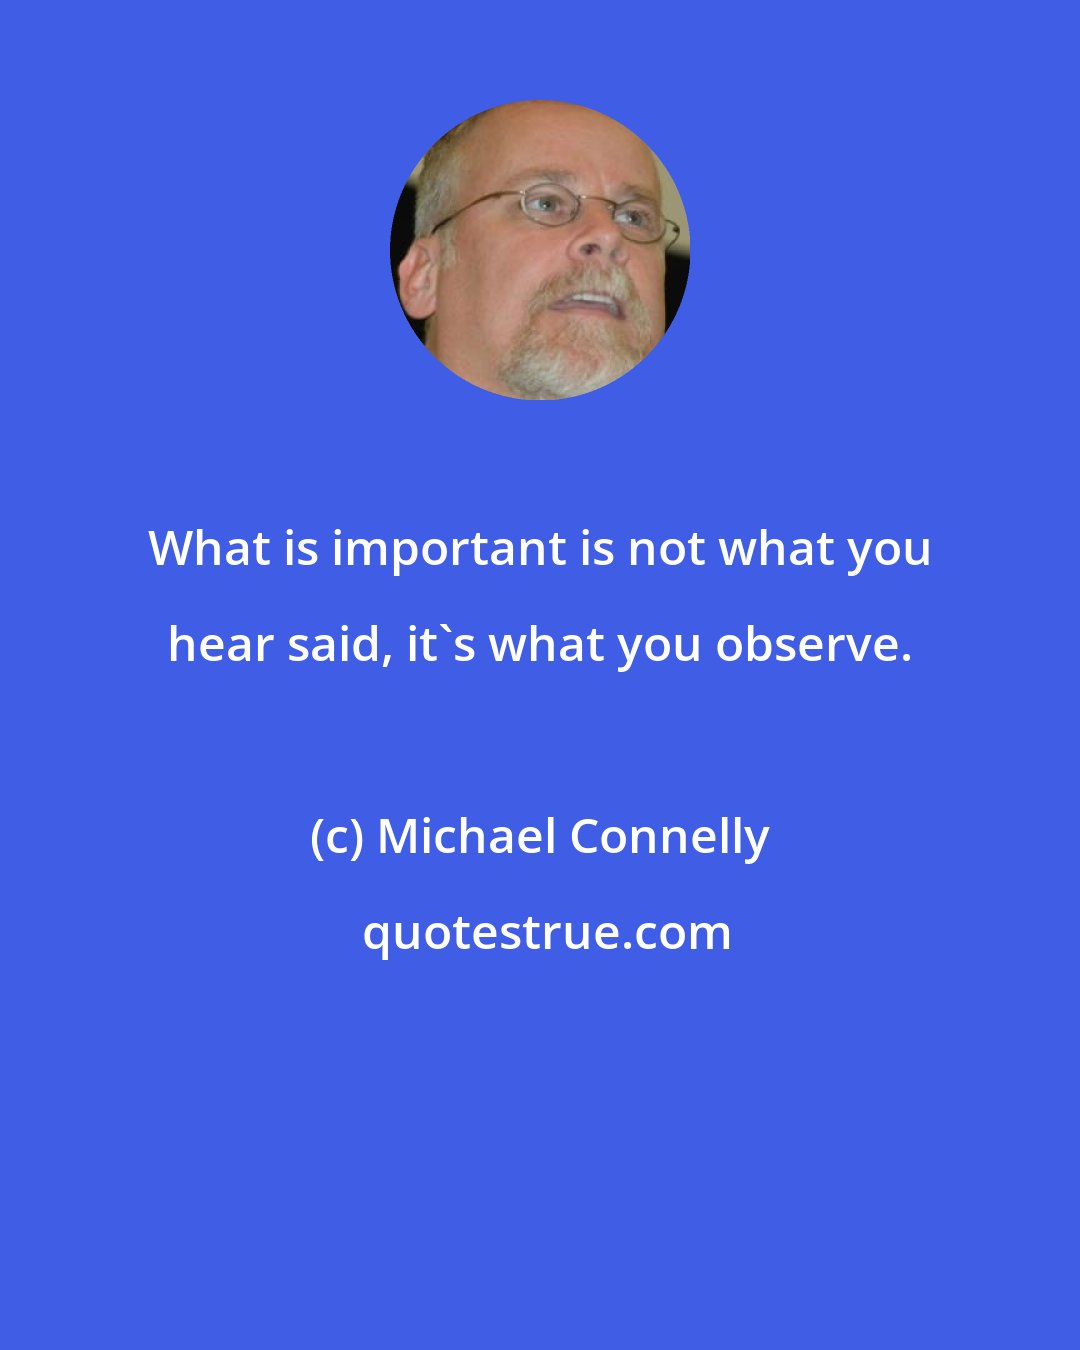 Michael Connelly: What is important is not what you hear said, it's what you observe.